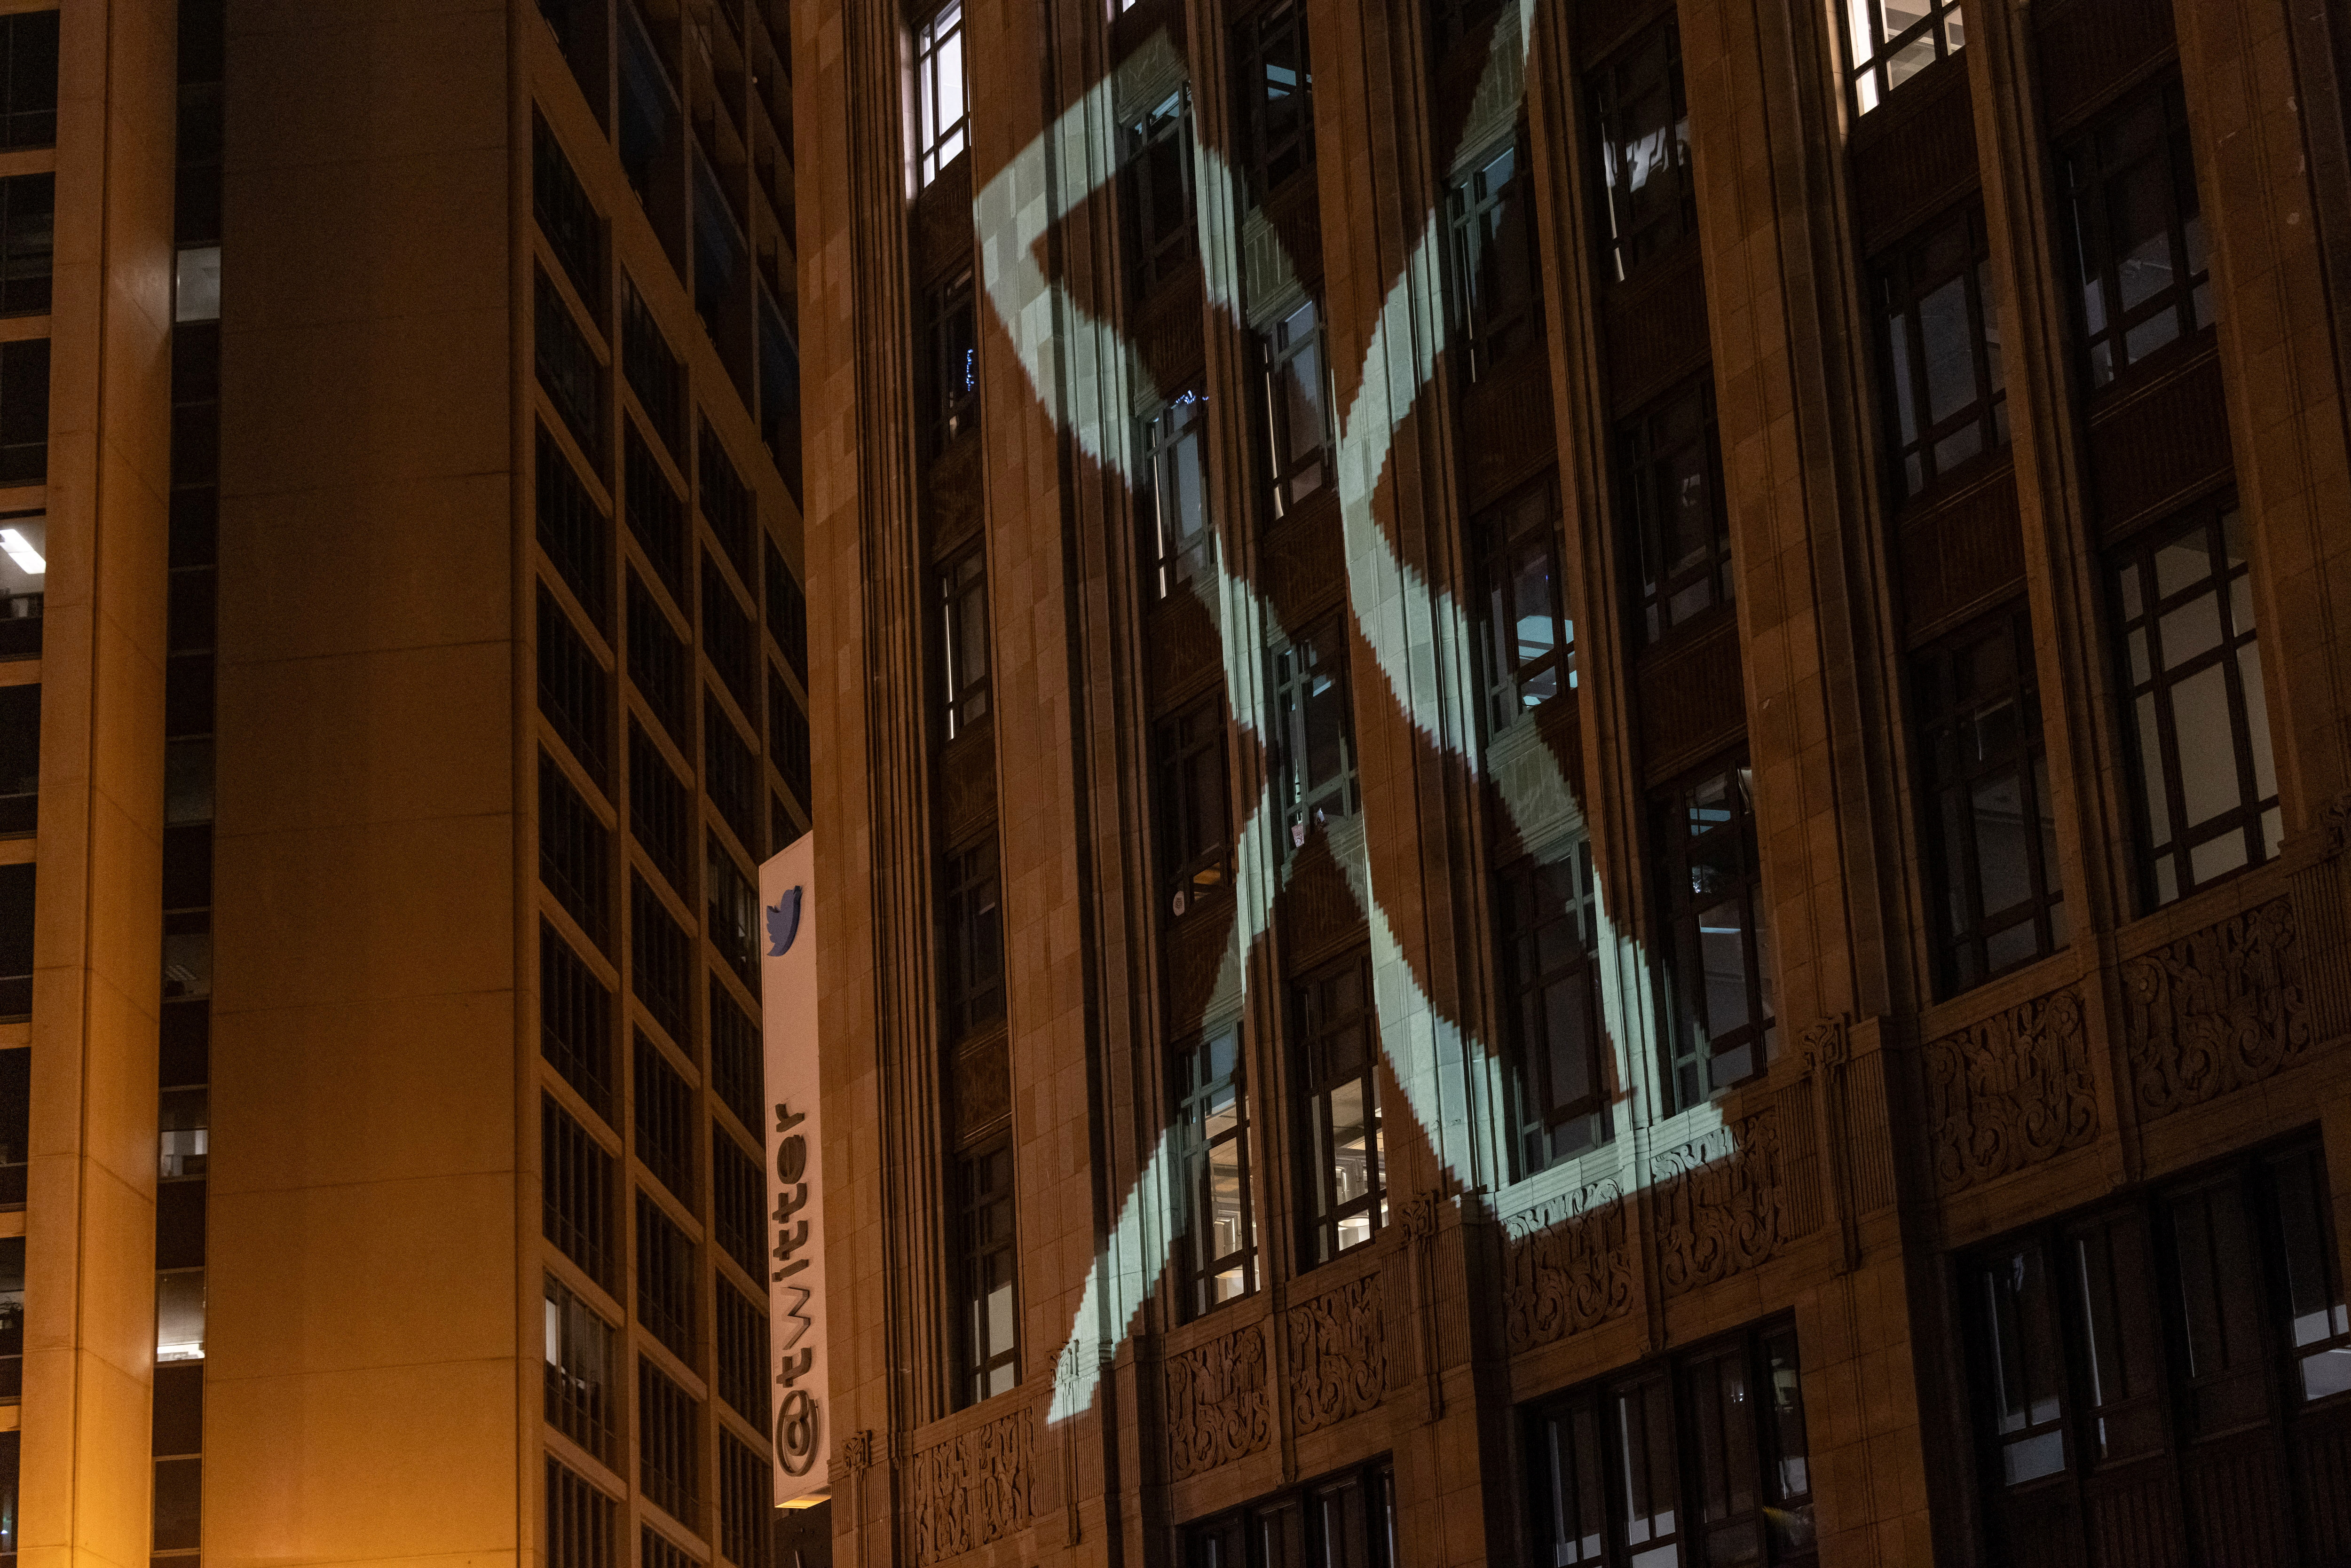 Twitter's new logo is seen projected on the corporate headquarters building in downtown San Francisco, California